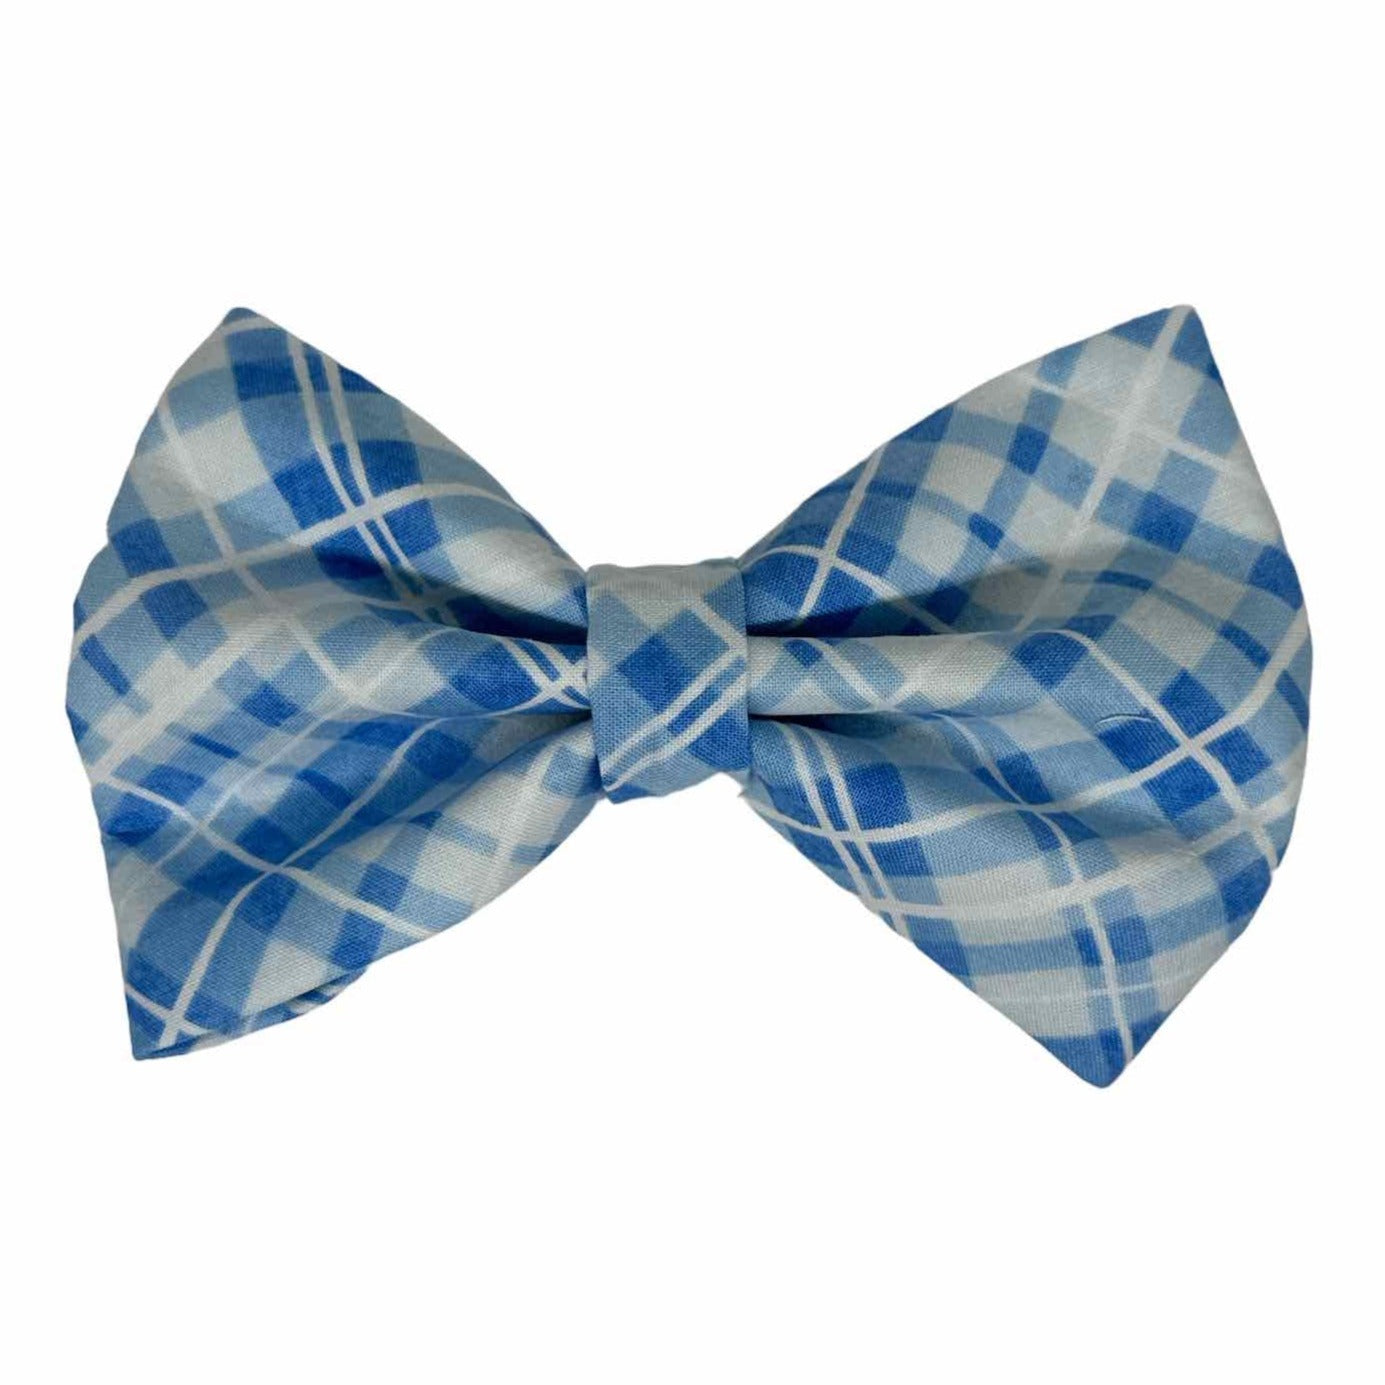 Crafted from classic sky blue madras plaid fabric, this bow exudes a timeless, preppy charm that’s perfect for any occasion